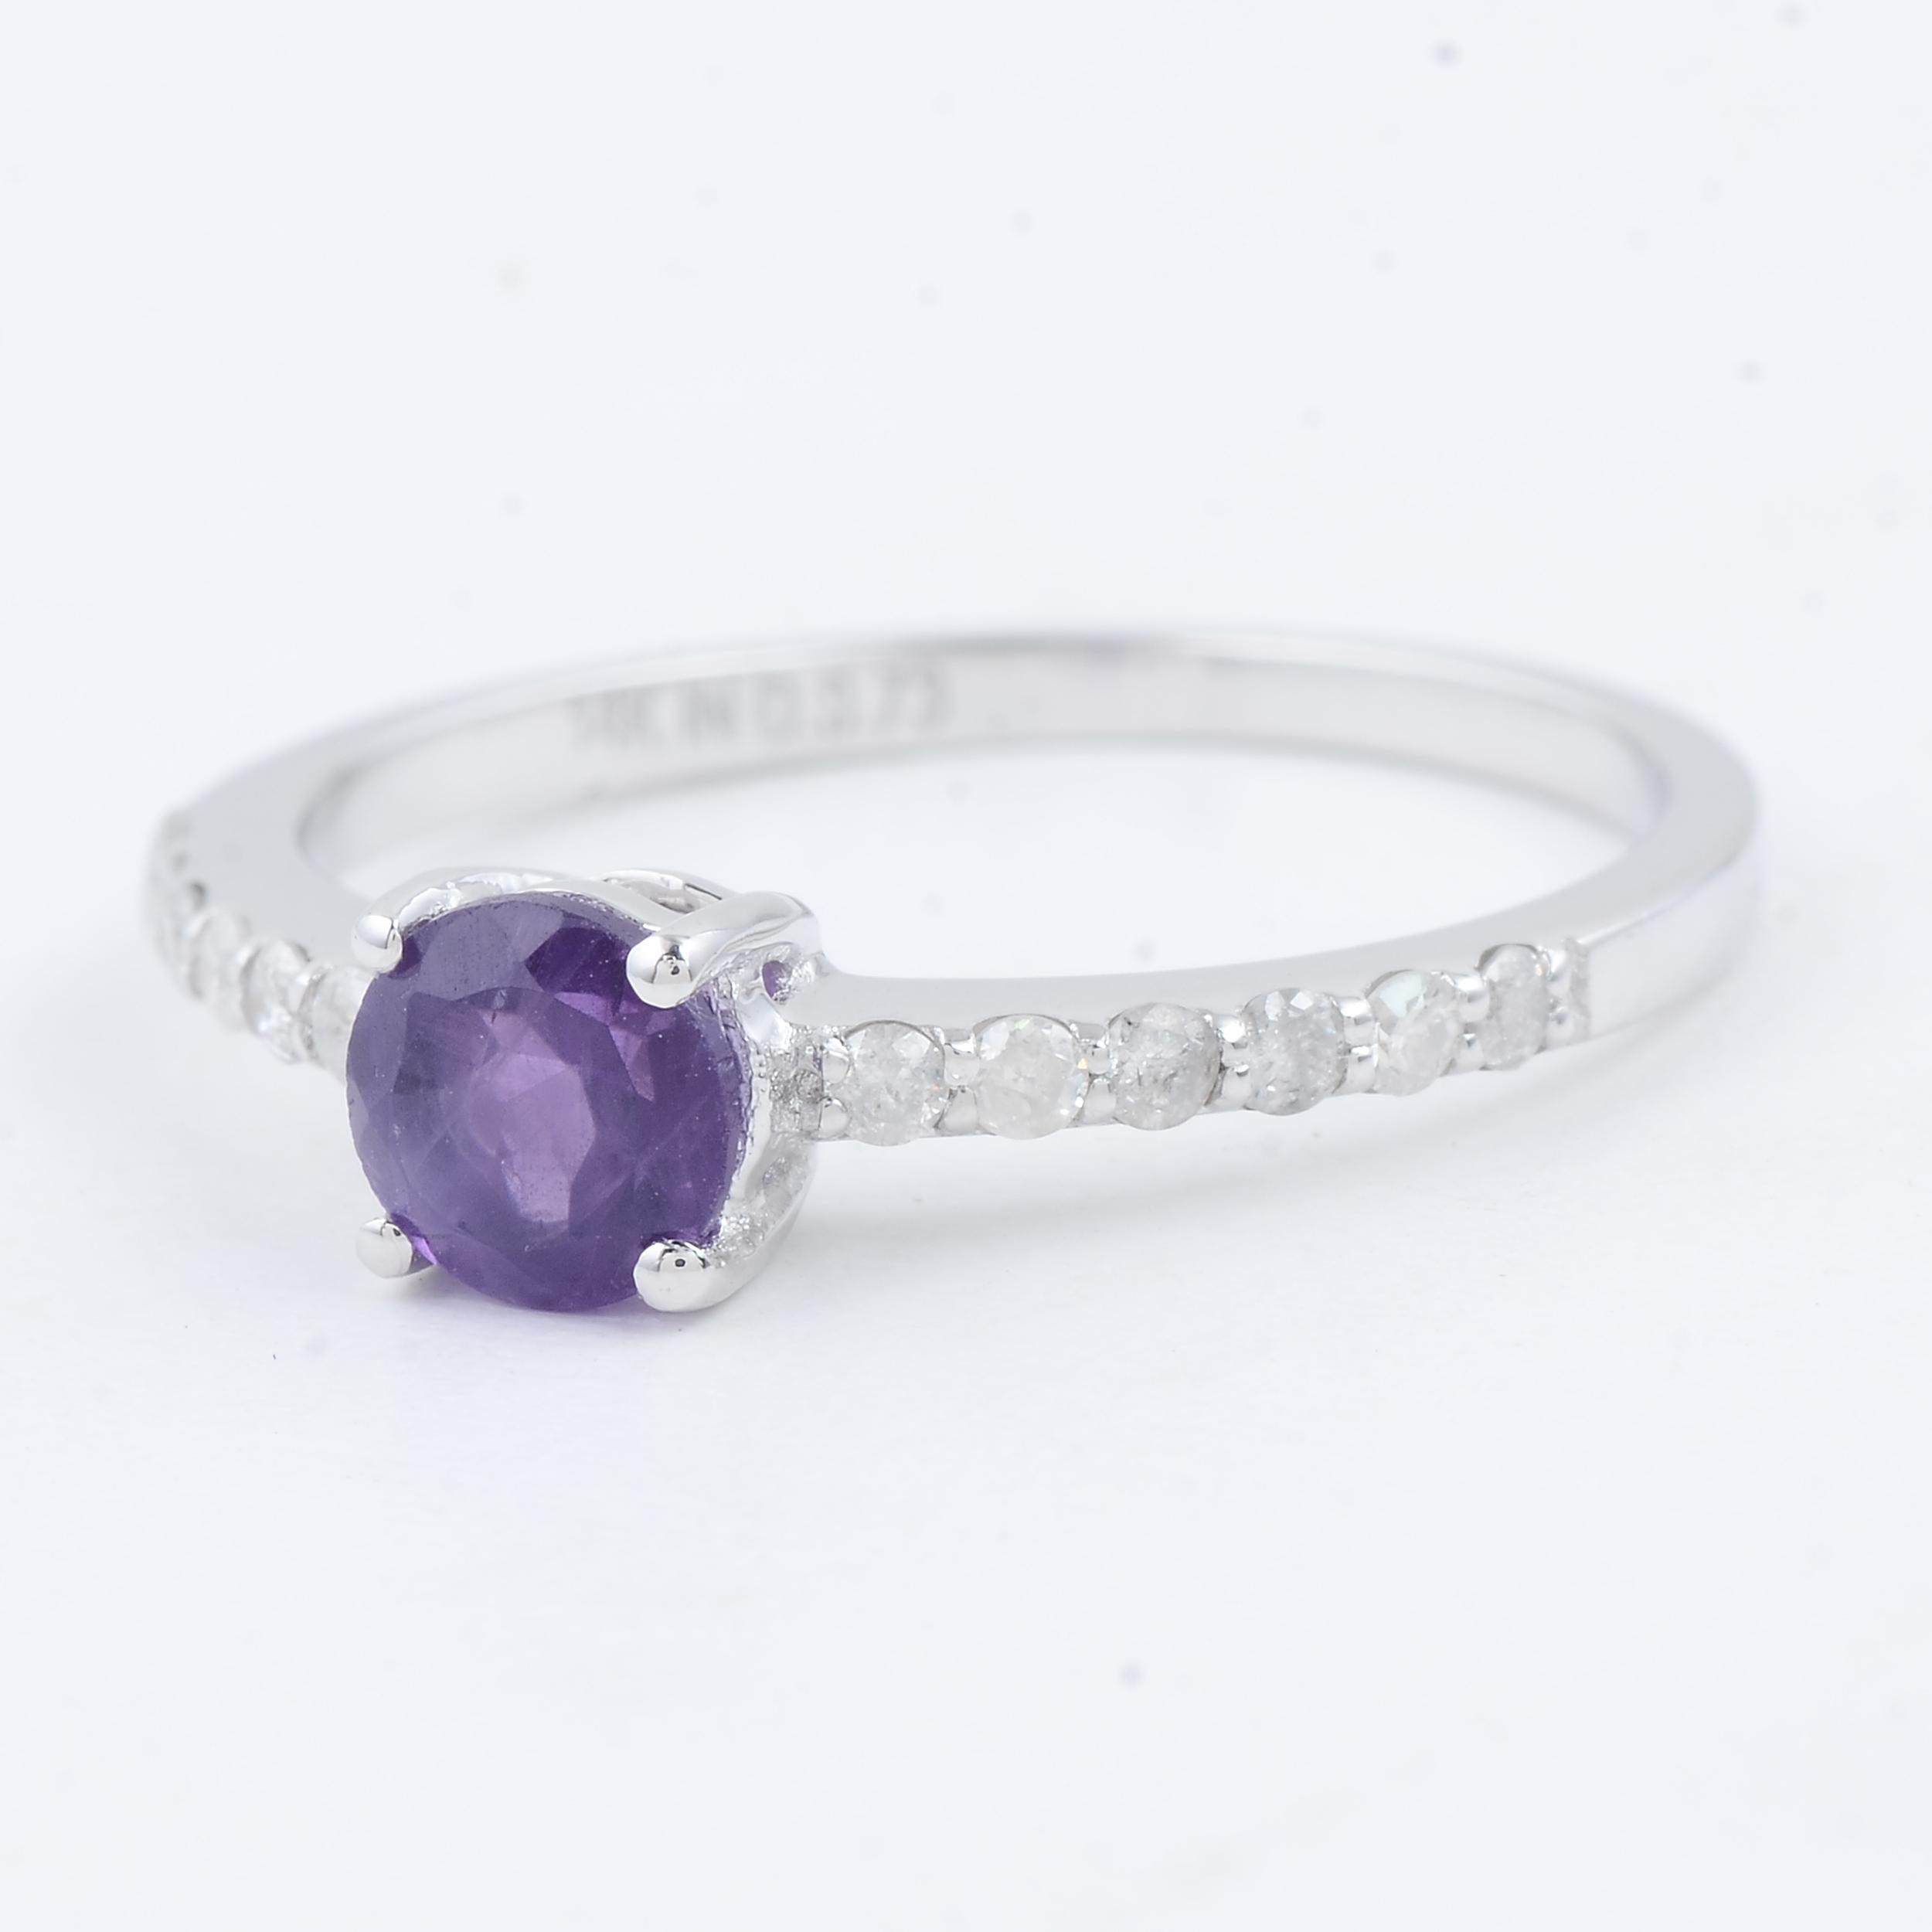 Brilliant Cut Luxurious 14K Amethyst & Diamond Cocktail Ring, Size 6.75 - Statement Jewelry For Sale